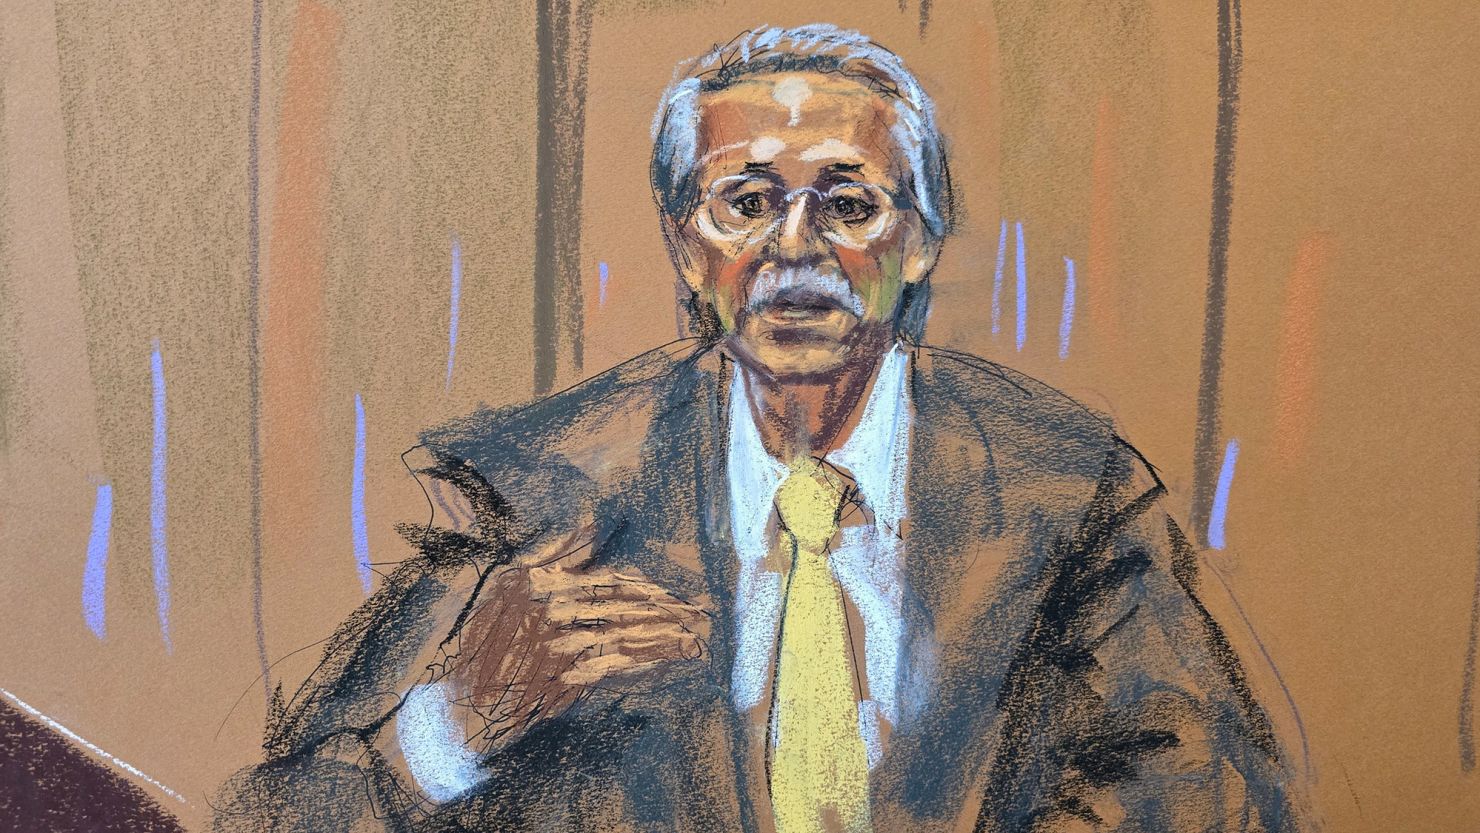 Former National Enquirer publisher David Pecker speaks from the witness stand during former U.S. President Donald Trump's criminal trial.